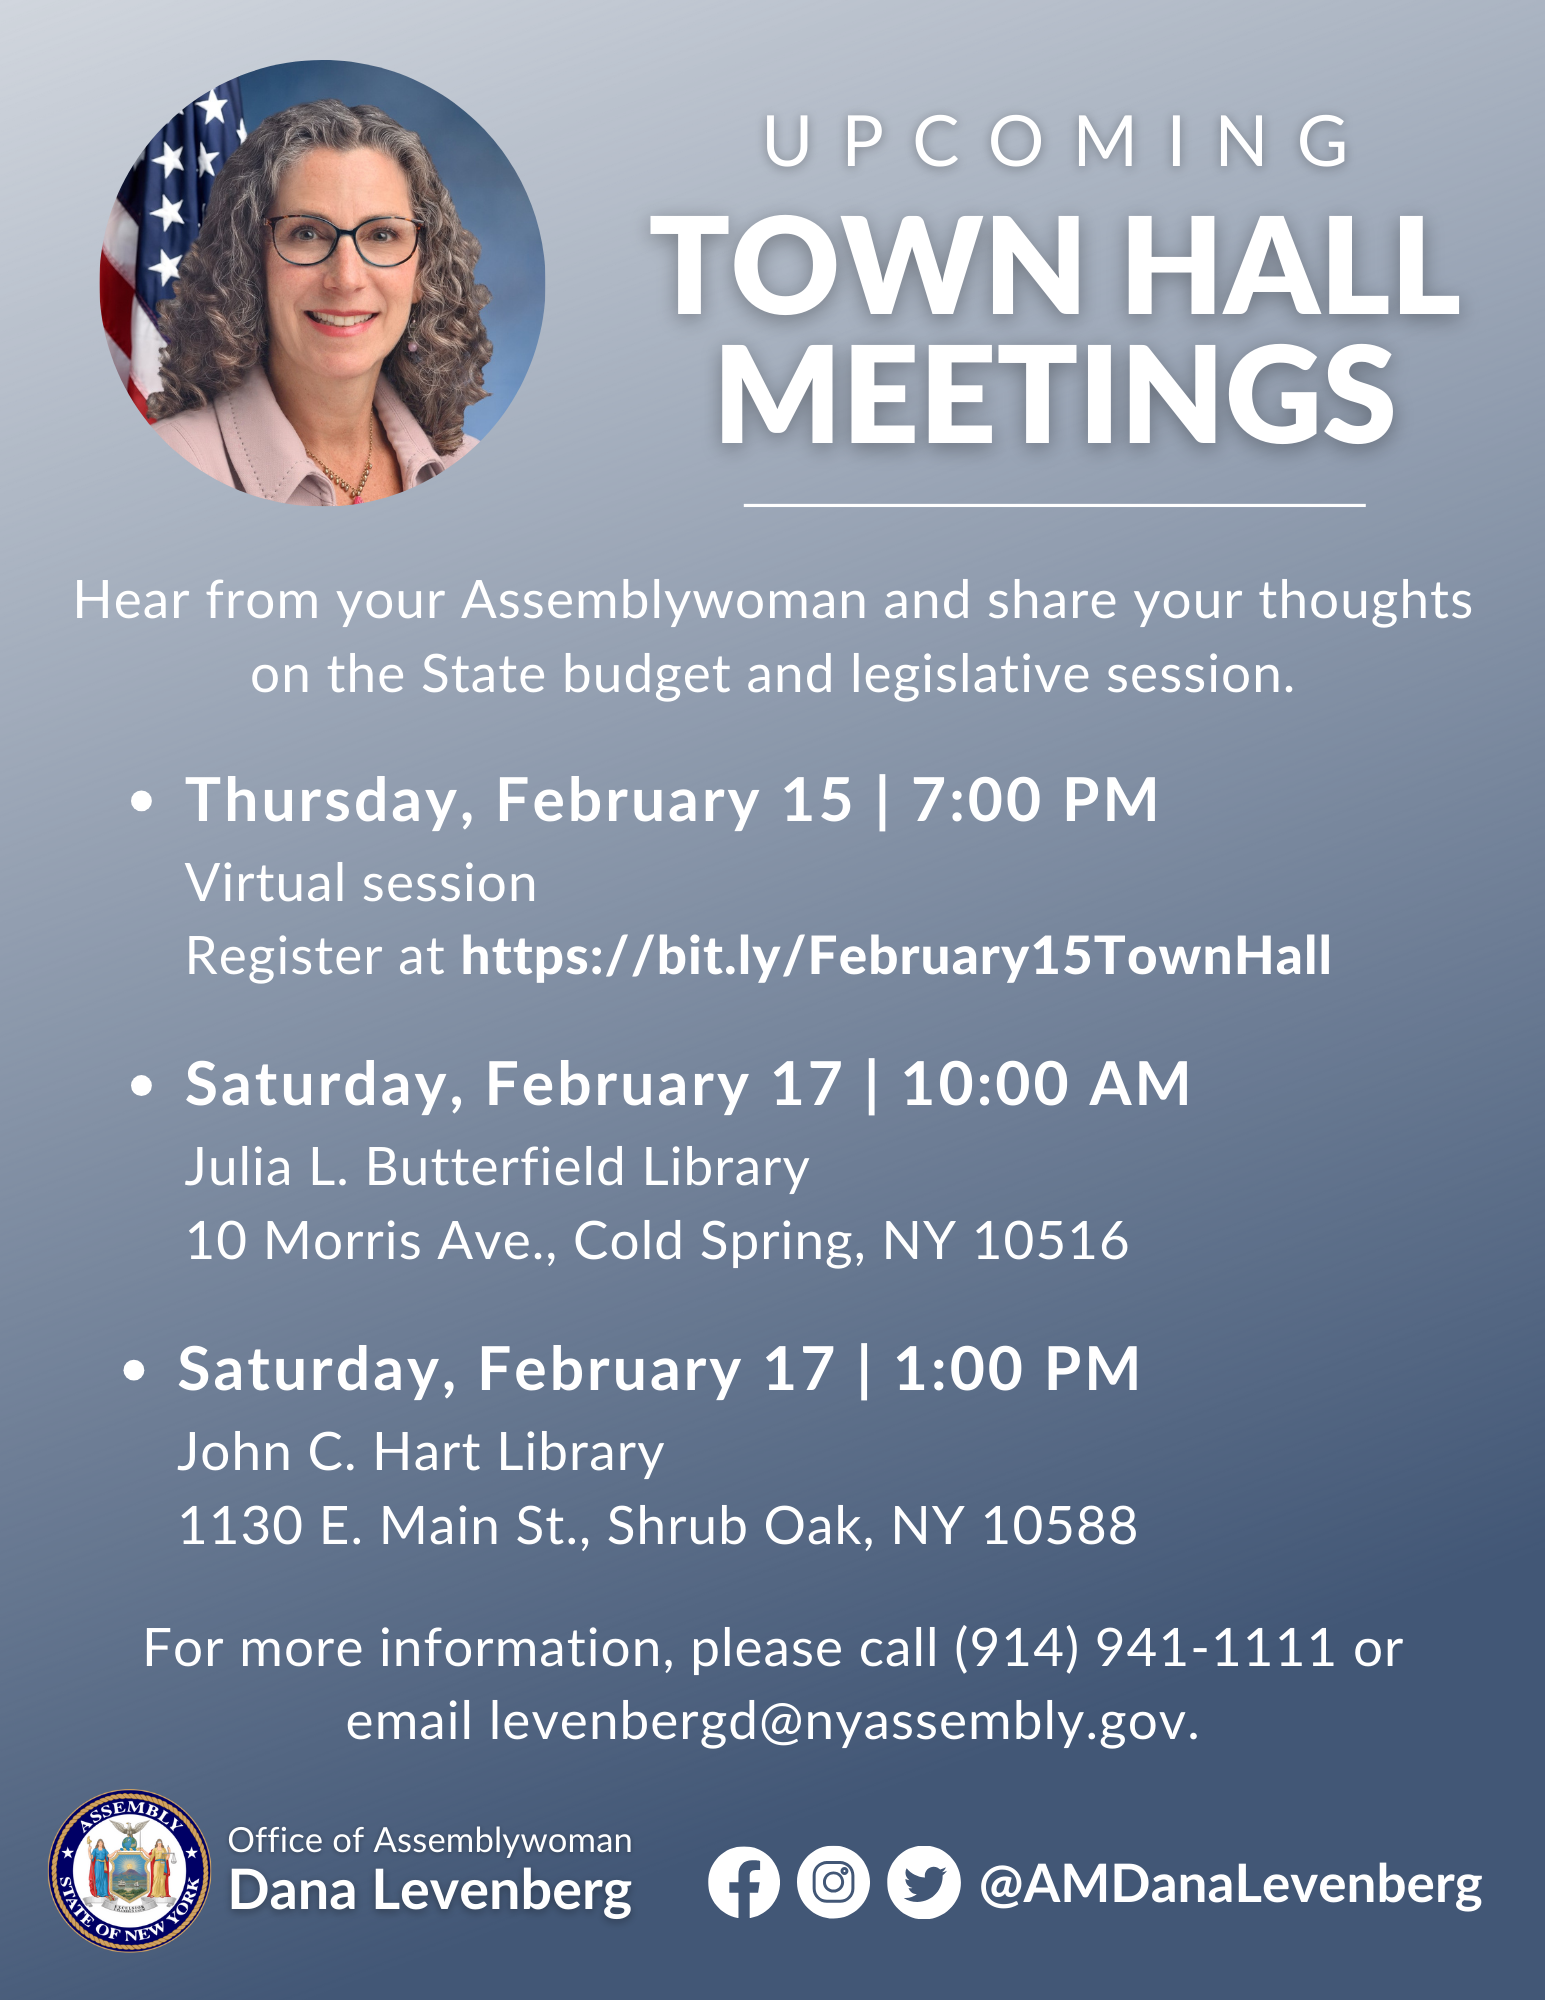 Upcoming Town Hall Meetings: Thursday, February 15, 7 p.m. Virtual session, register at https://bit.ly./February15TownHall; Saturday, February 17, 10 a.m. at Julia L. Butterfield Library, 10 Morris Avenue, Cold Spring; Saturday, February 17, 1 p.m. at John C. Hart Library, 1130 E.Main Street, Shrub Oak, New York. For more information, please call (914) 941-1111 or email levenbergd@nyassembly.gov.